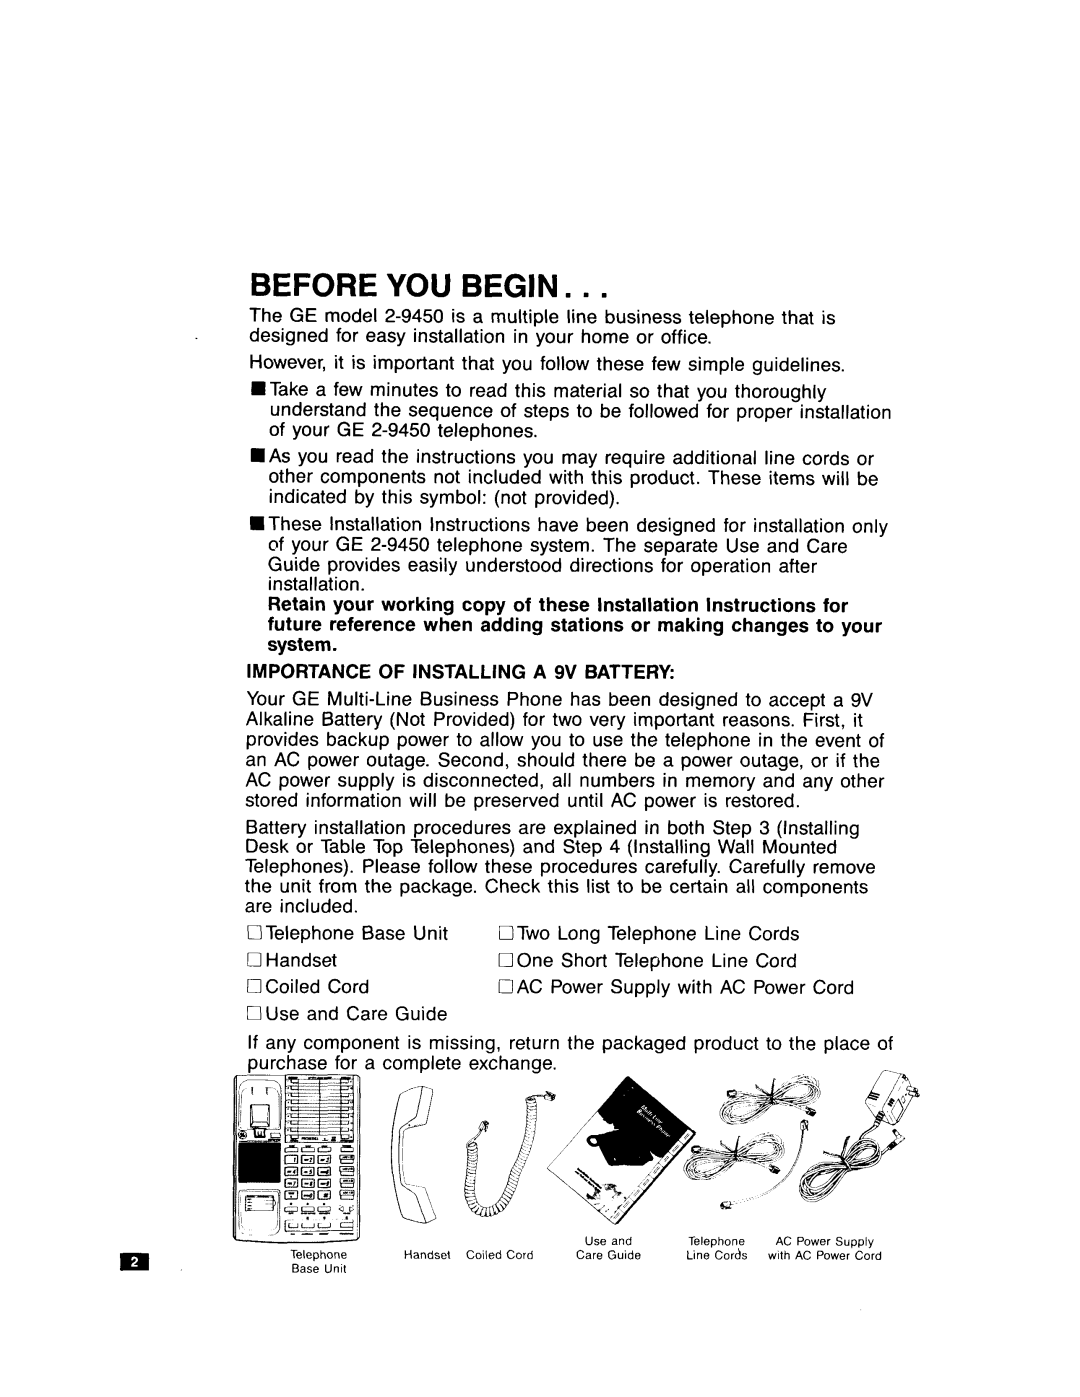 GE Feb-50 installation instructions Before You Begin, IMPORTANCE OF INSTALLING A 9V BATTERY, Suddiv 